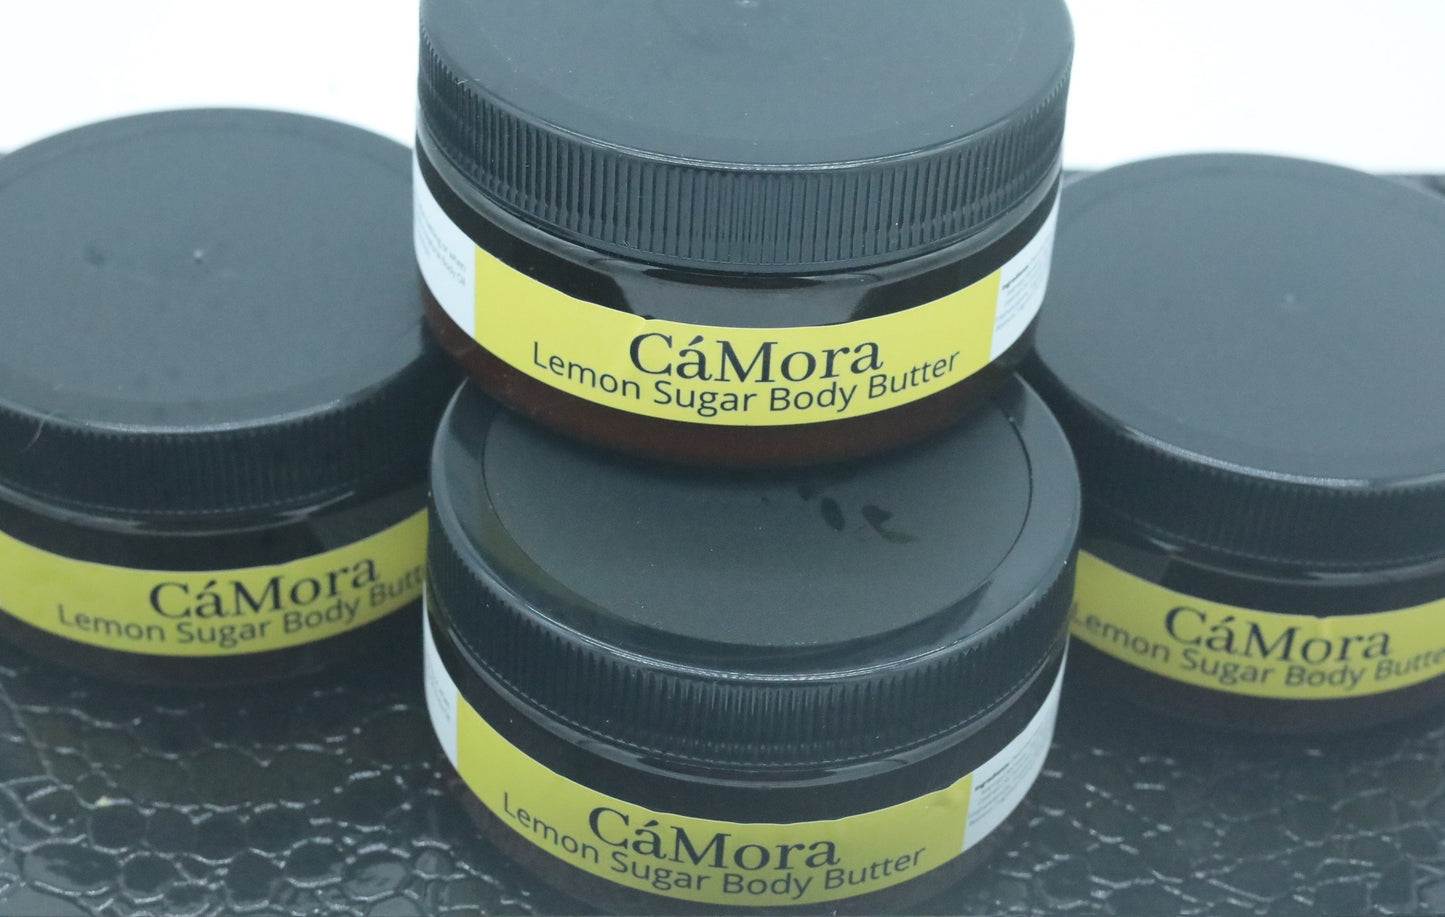 Lemon Sugar body butters, multiple container collage.